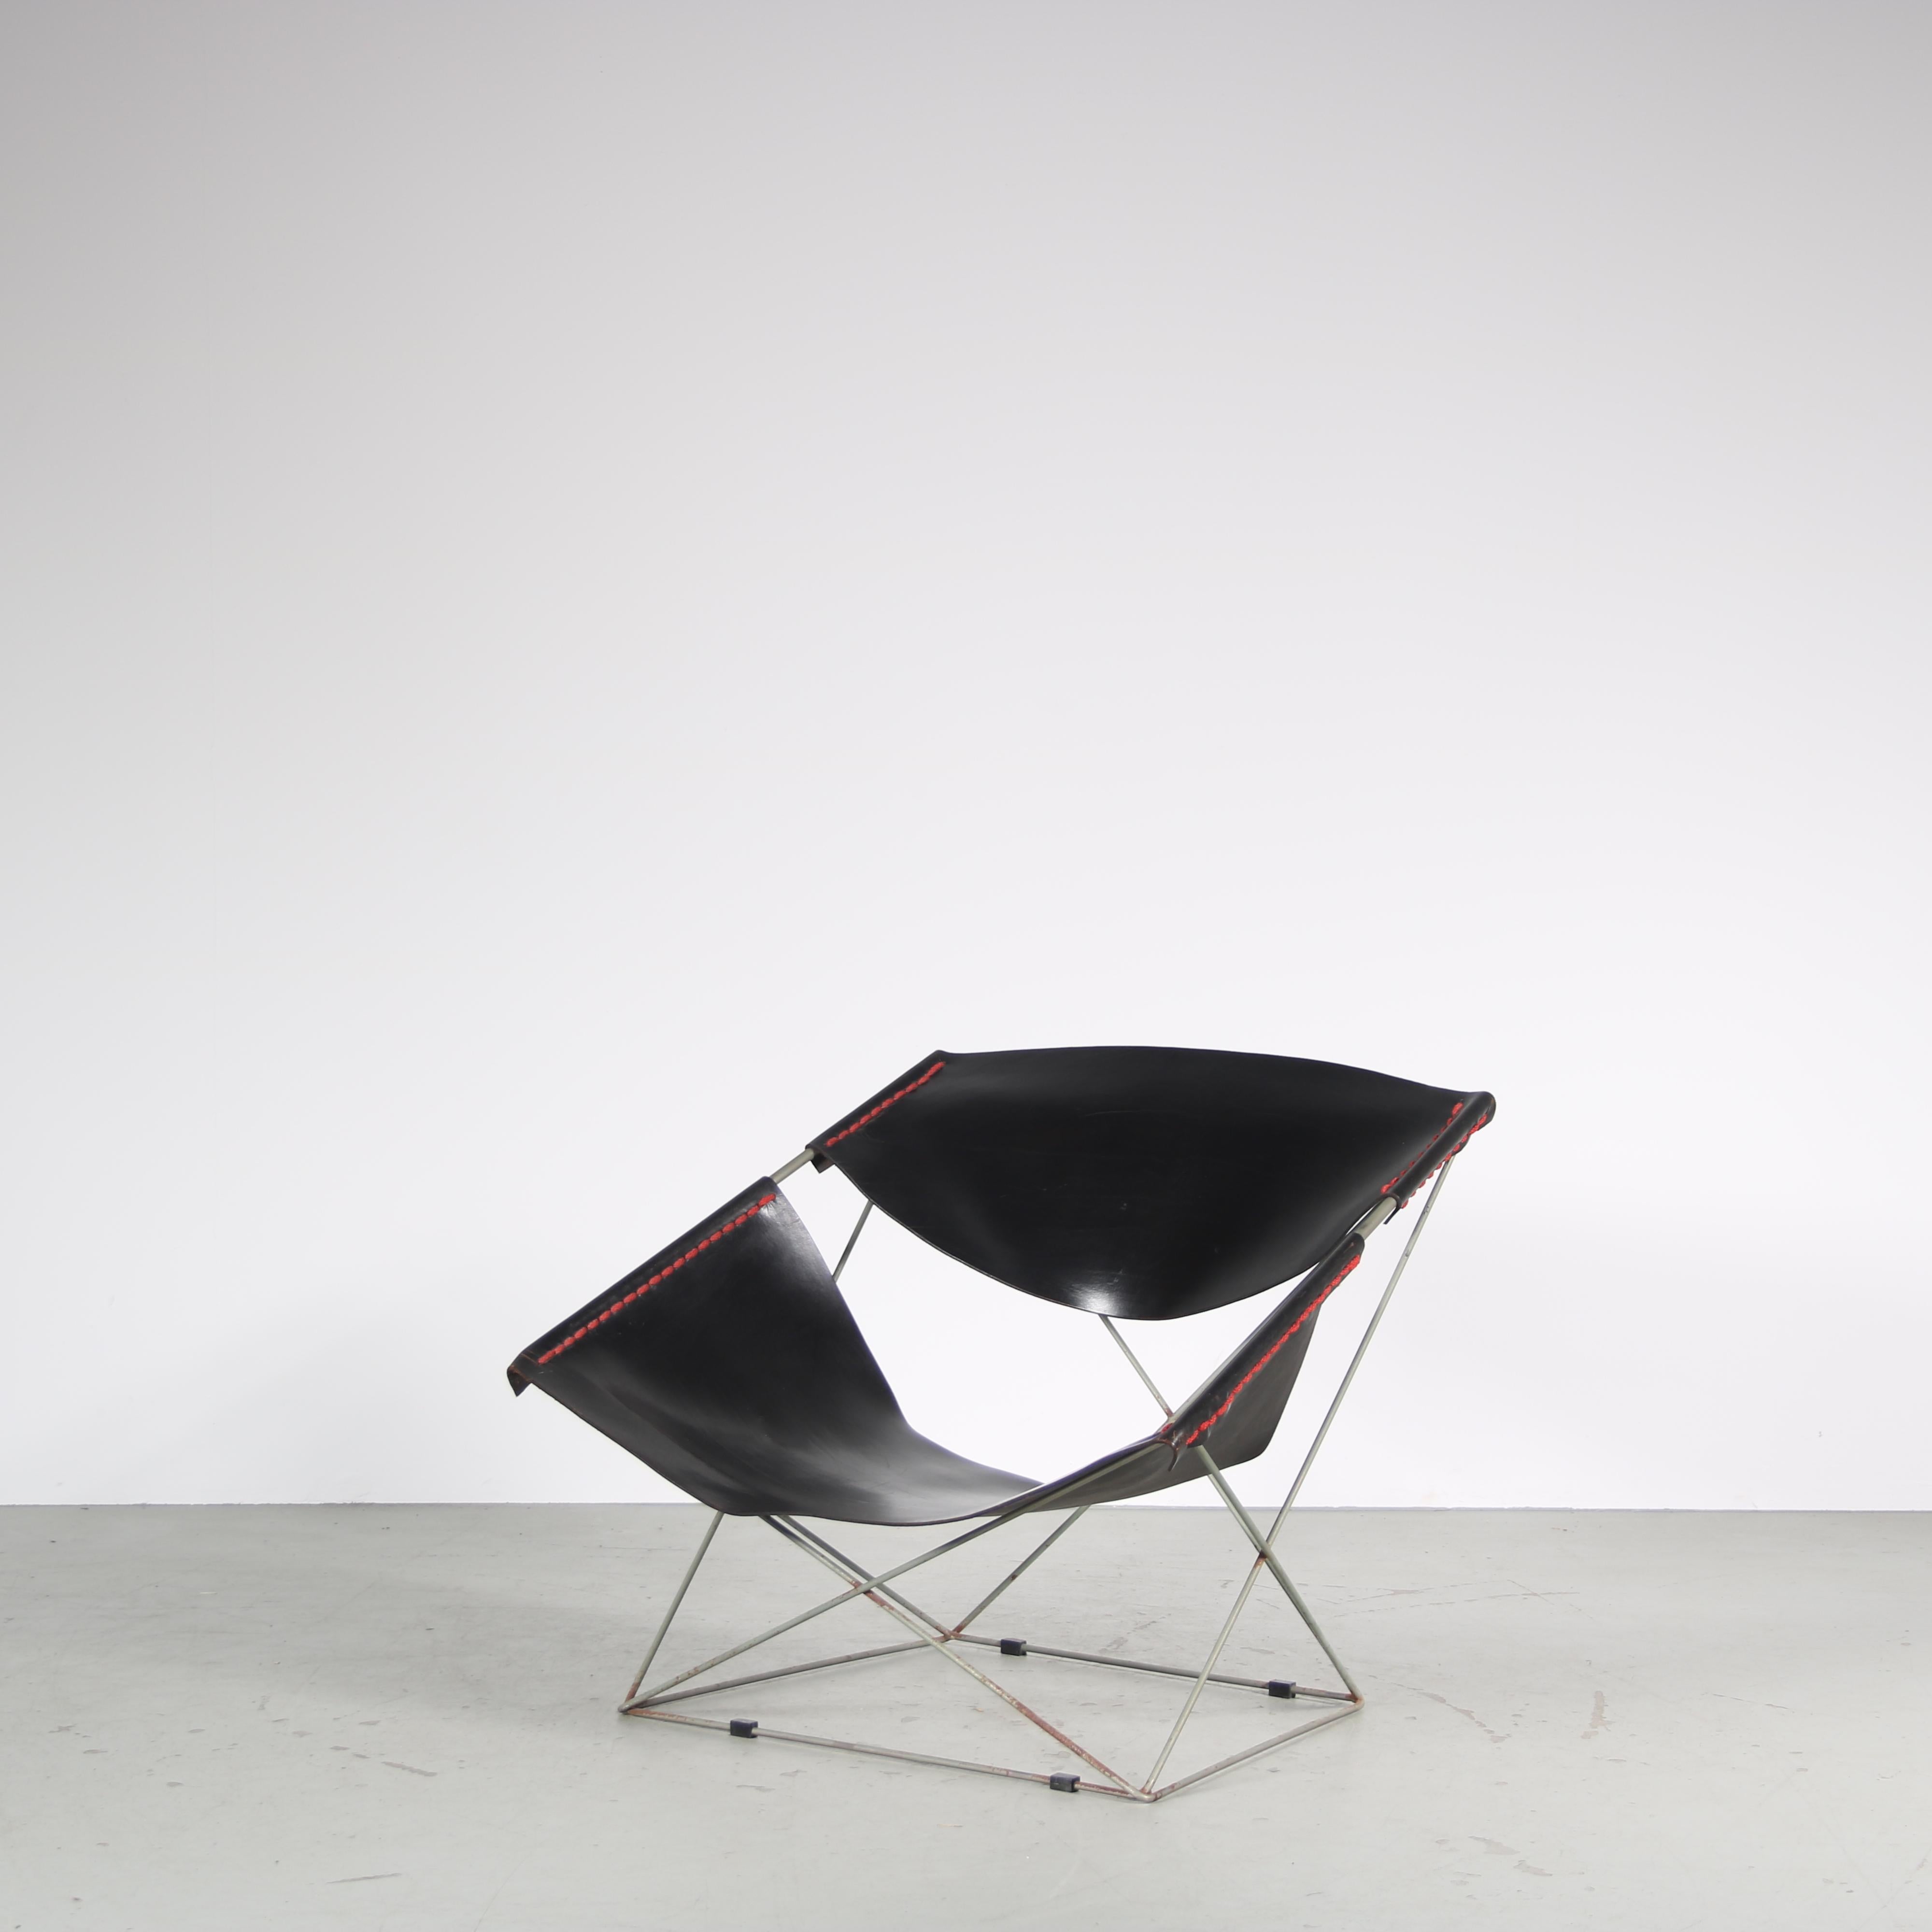 An iconic “Butterfly” lounge chair, model F675, designed by Pierre Paulin and manufactured by Artifort in the Netherlands around 1960.

Made of high quality chrome plated metal holding black saddle leather for the seat and back. This combination